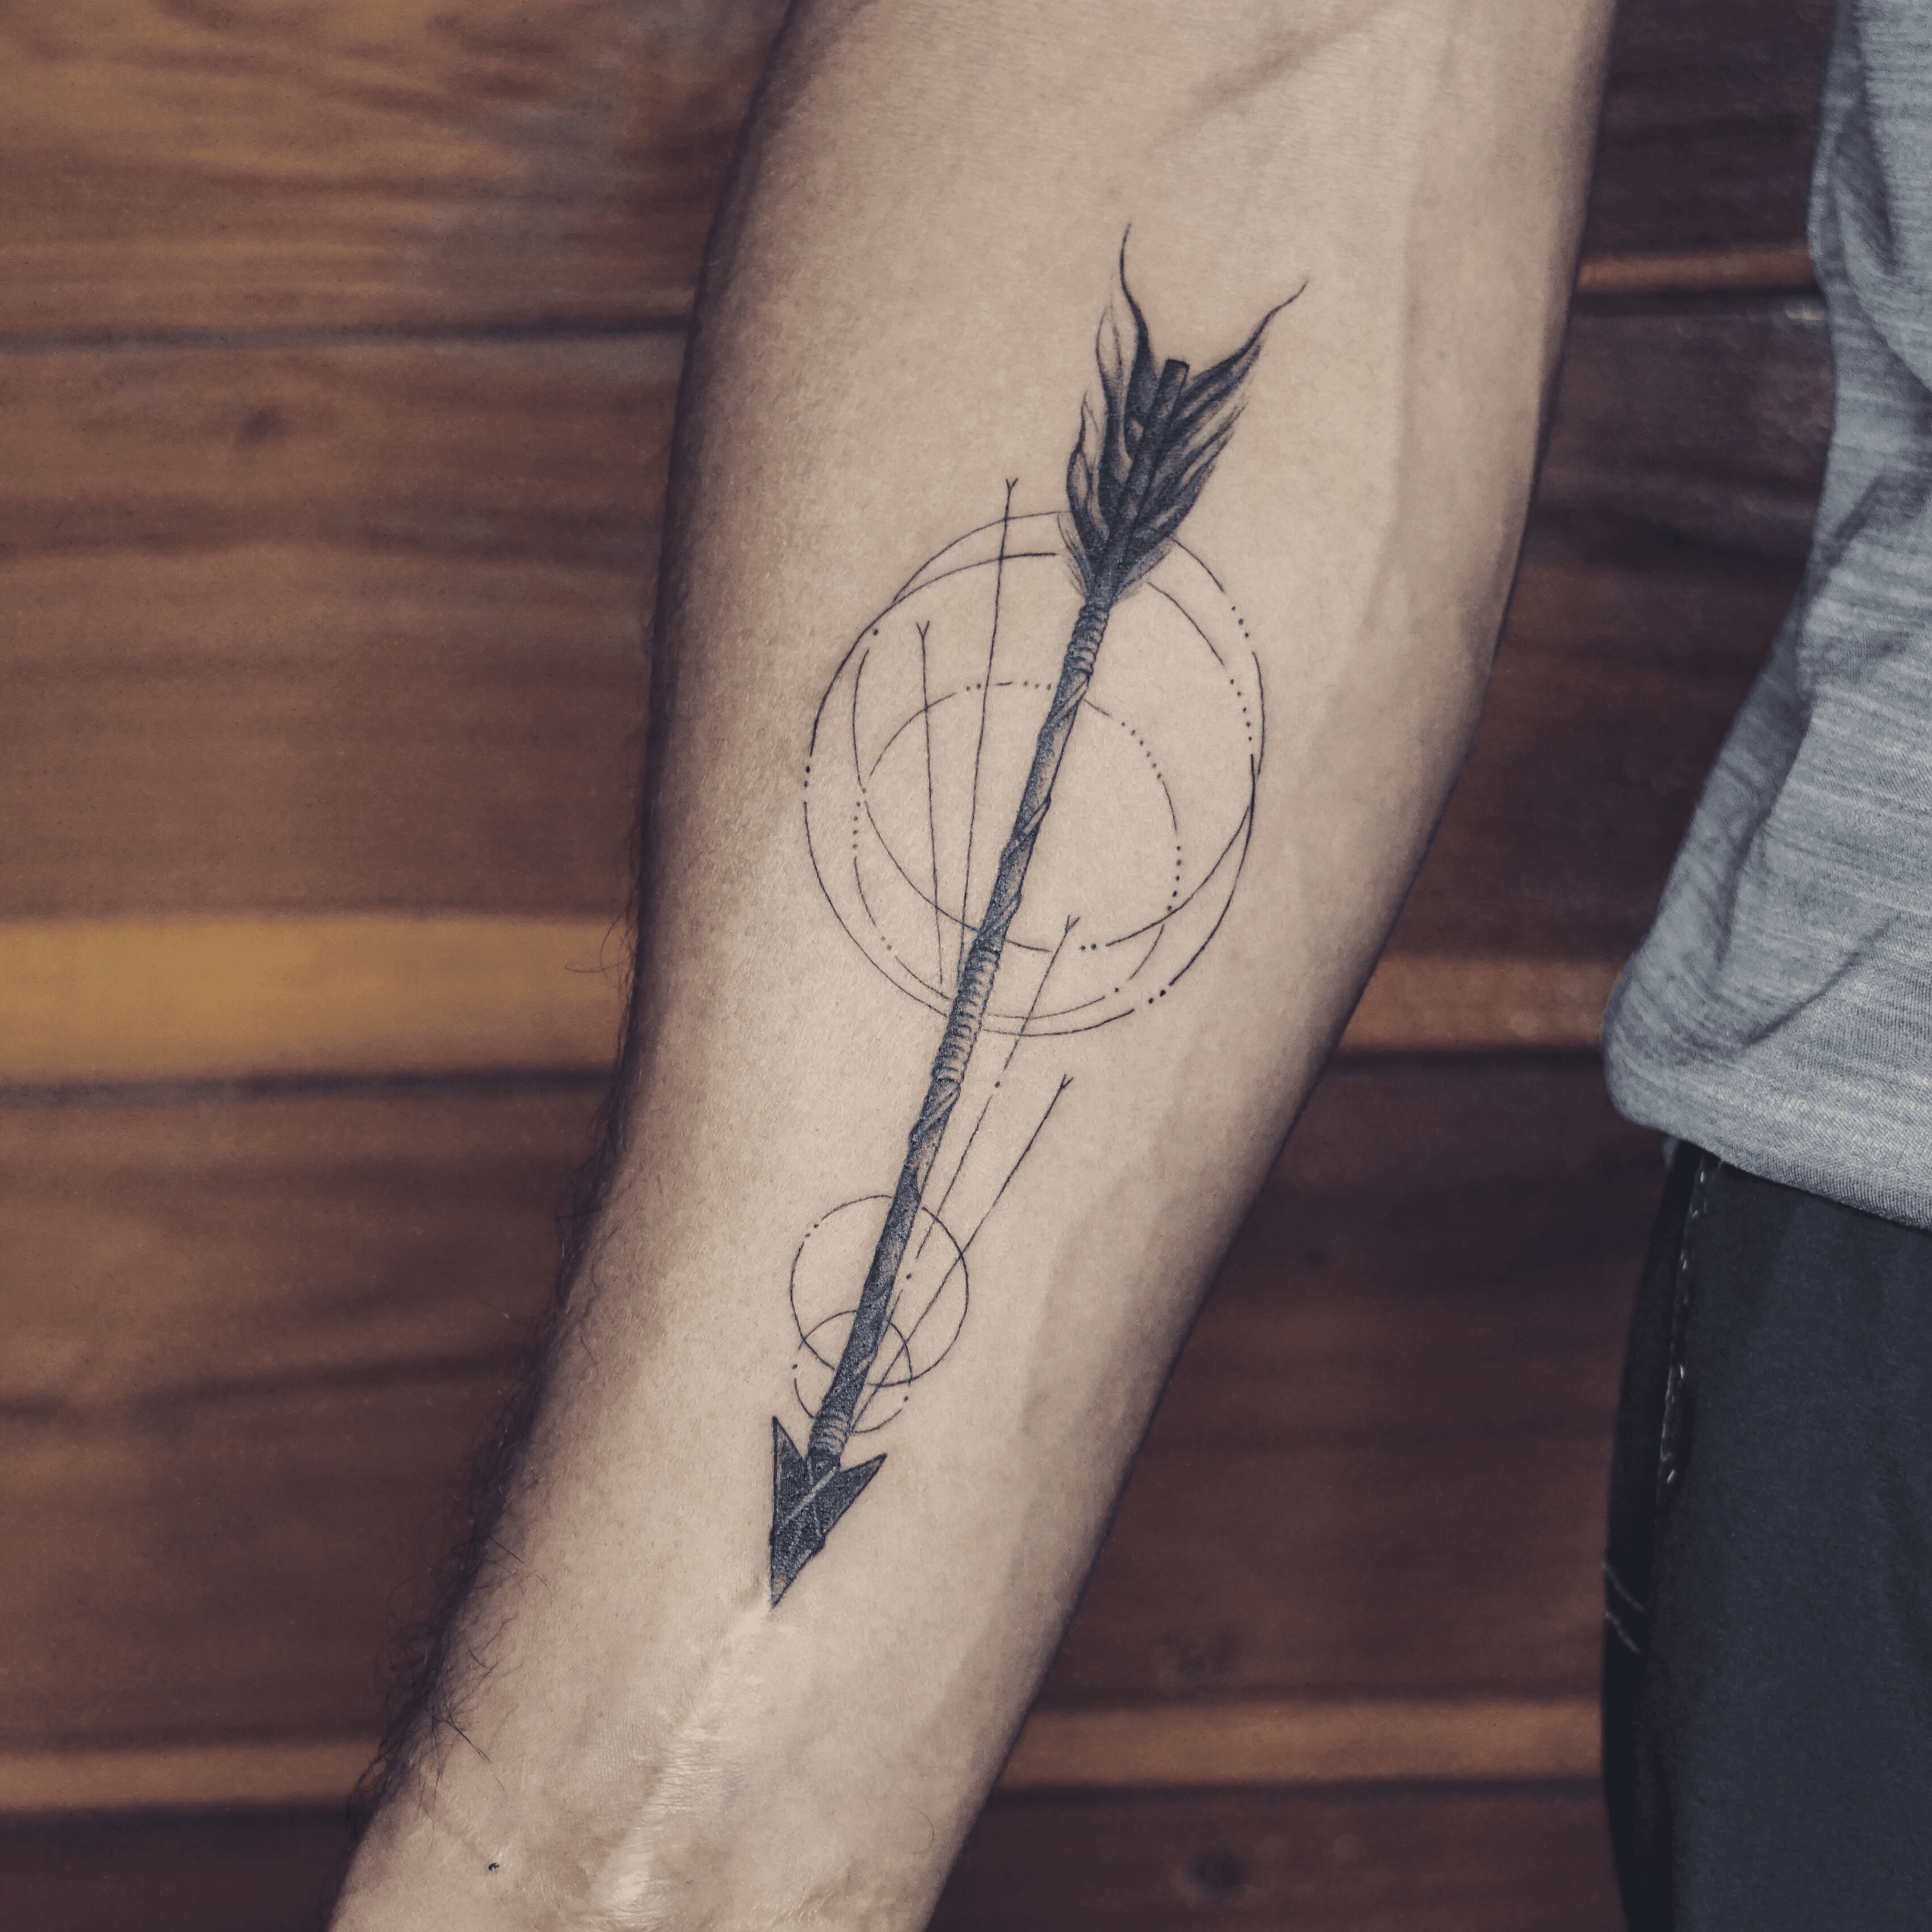 3 arrows to represent my 3 brothers full circle tattoo San Diego CA  r tattoos